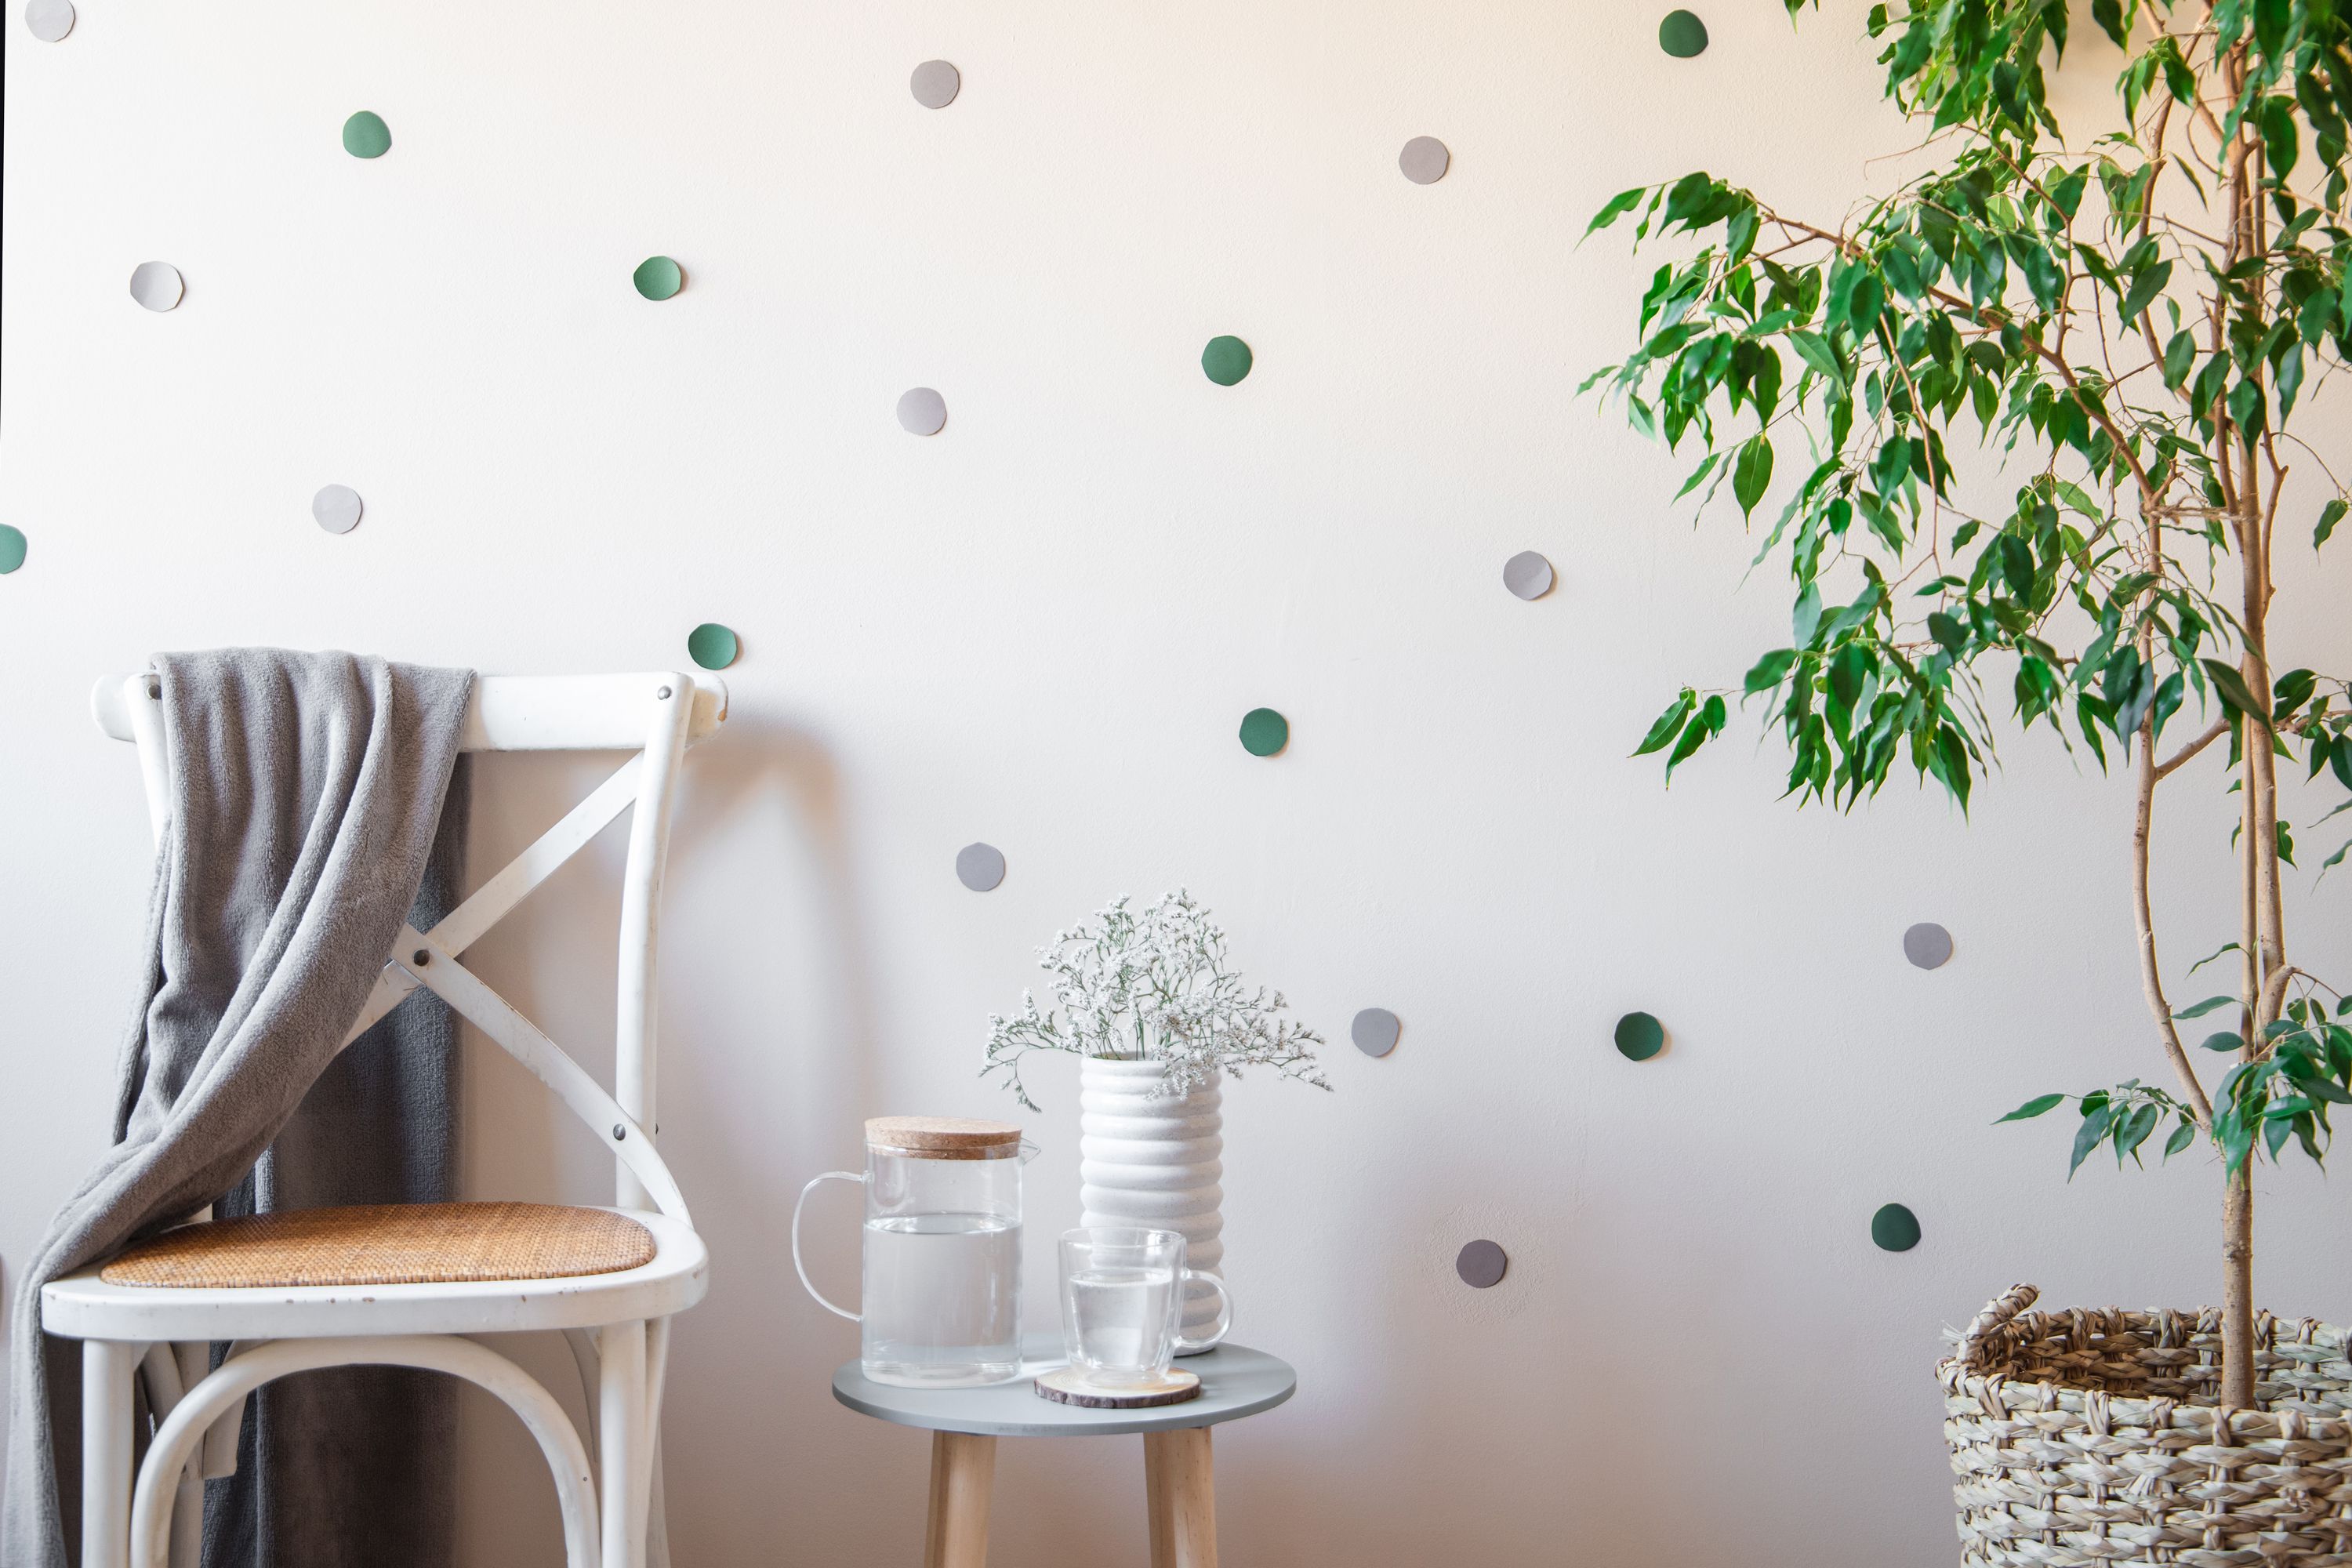 6 Pretty and Affordable Ways to Decorate Walls Without Paint